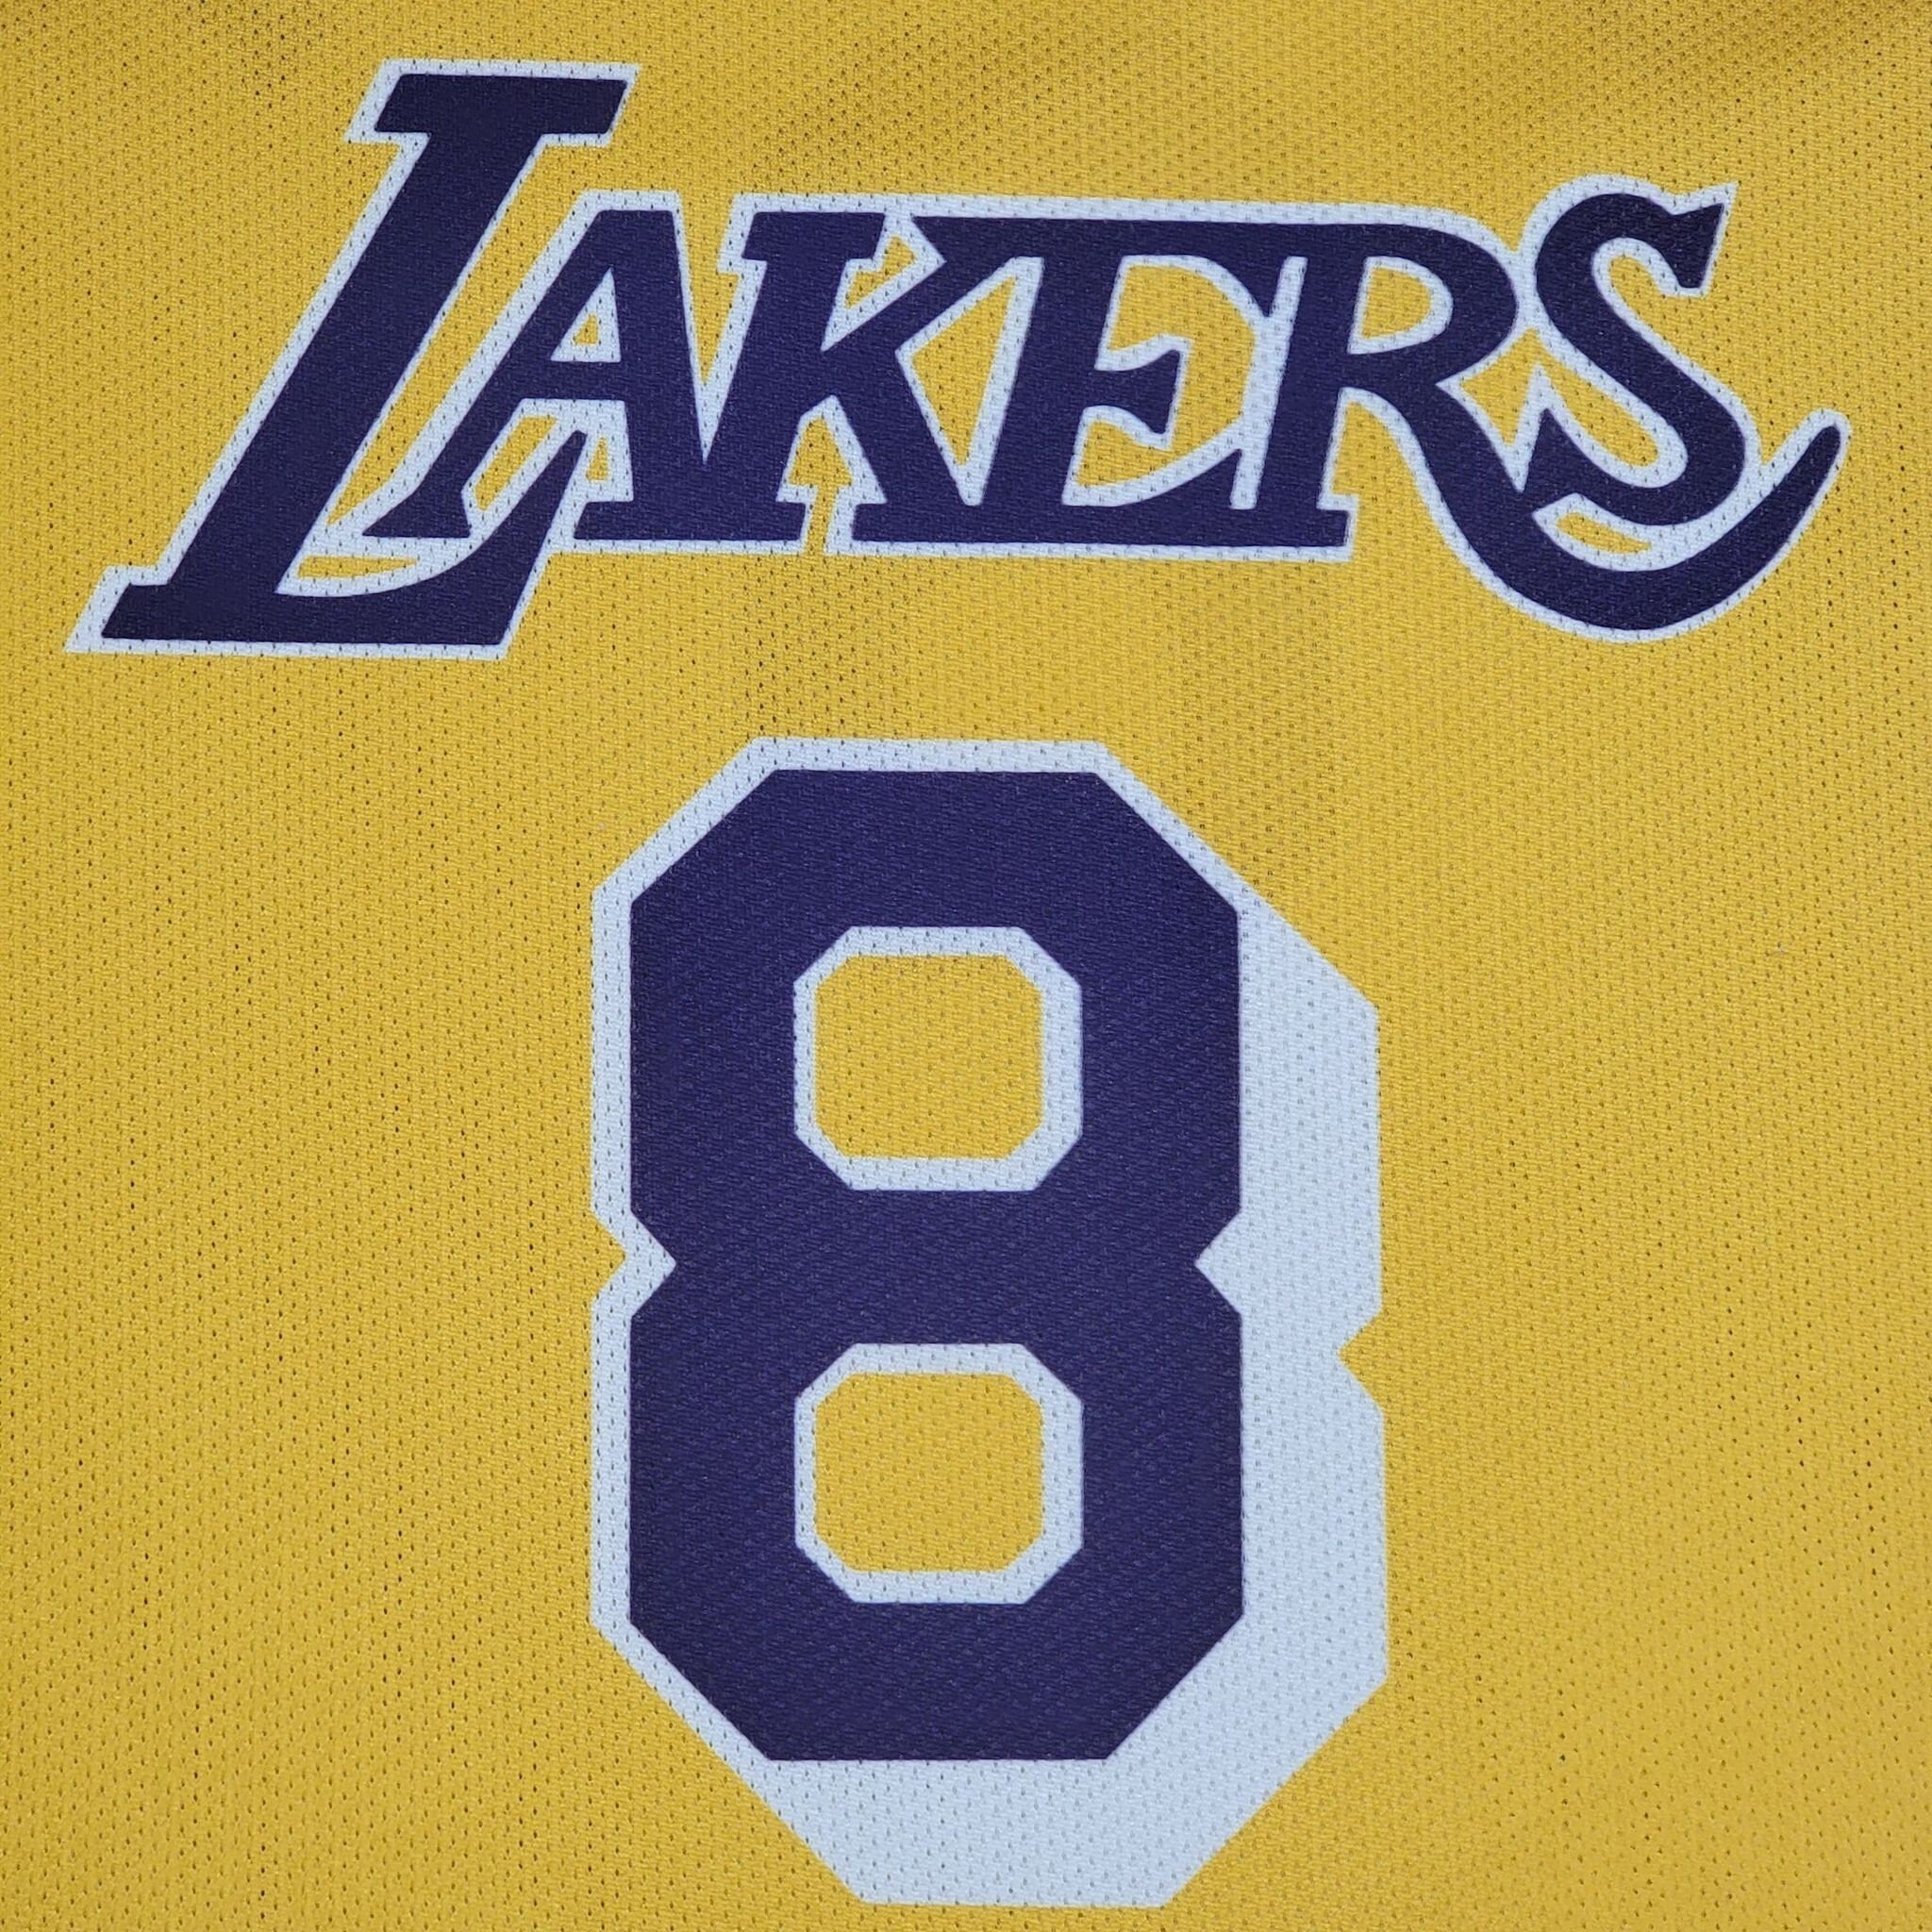 Los Angeles Lakers Vintage 90s Champion Youth Basketball Jersey Unifor